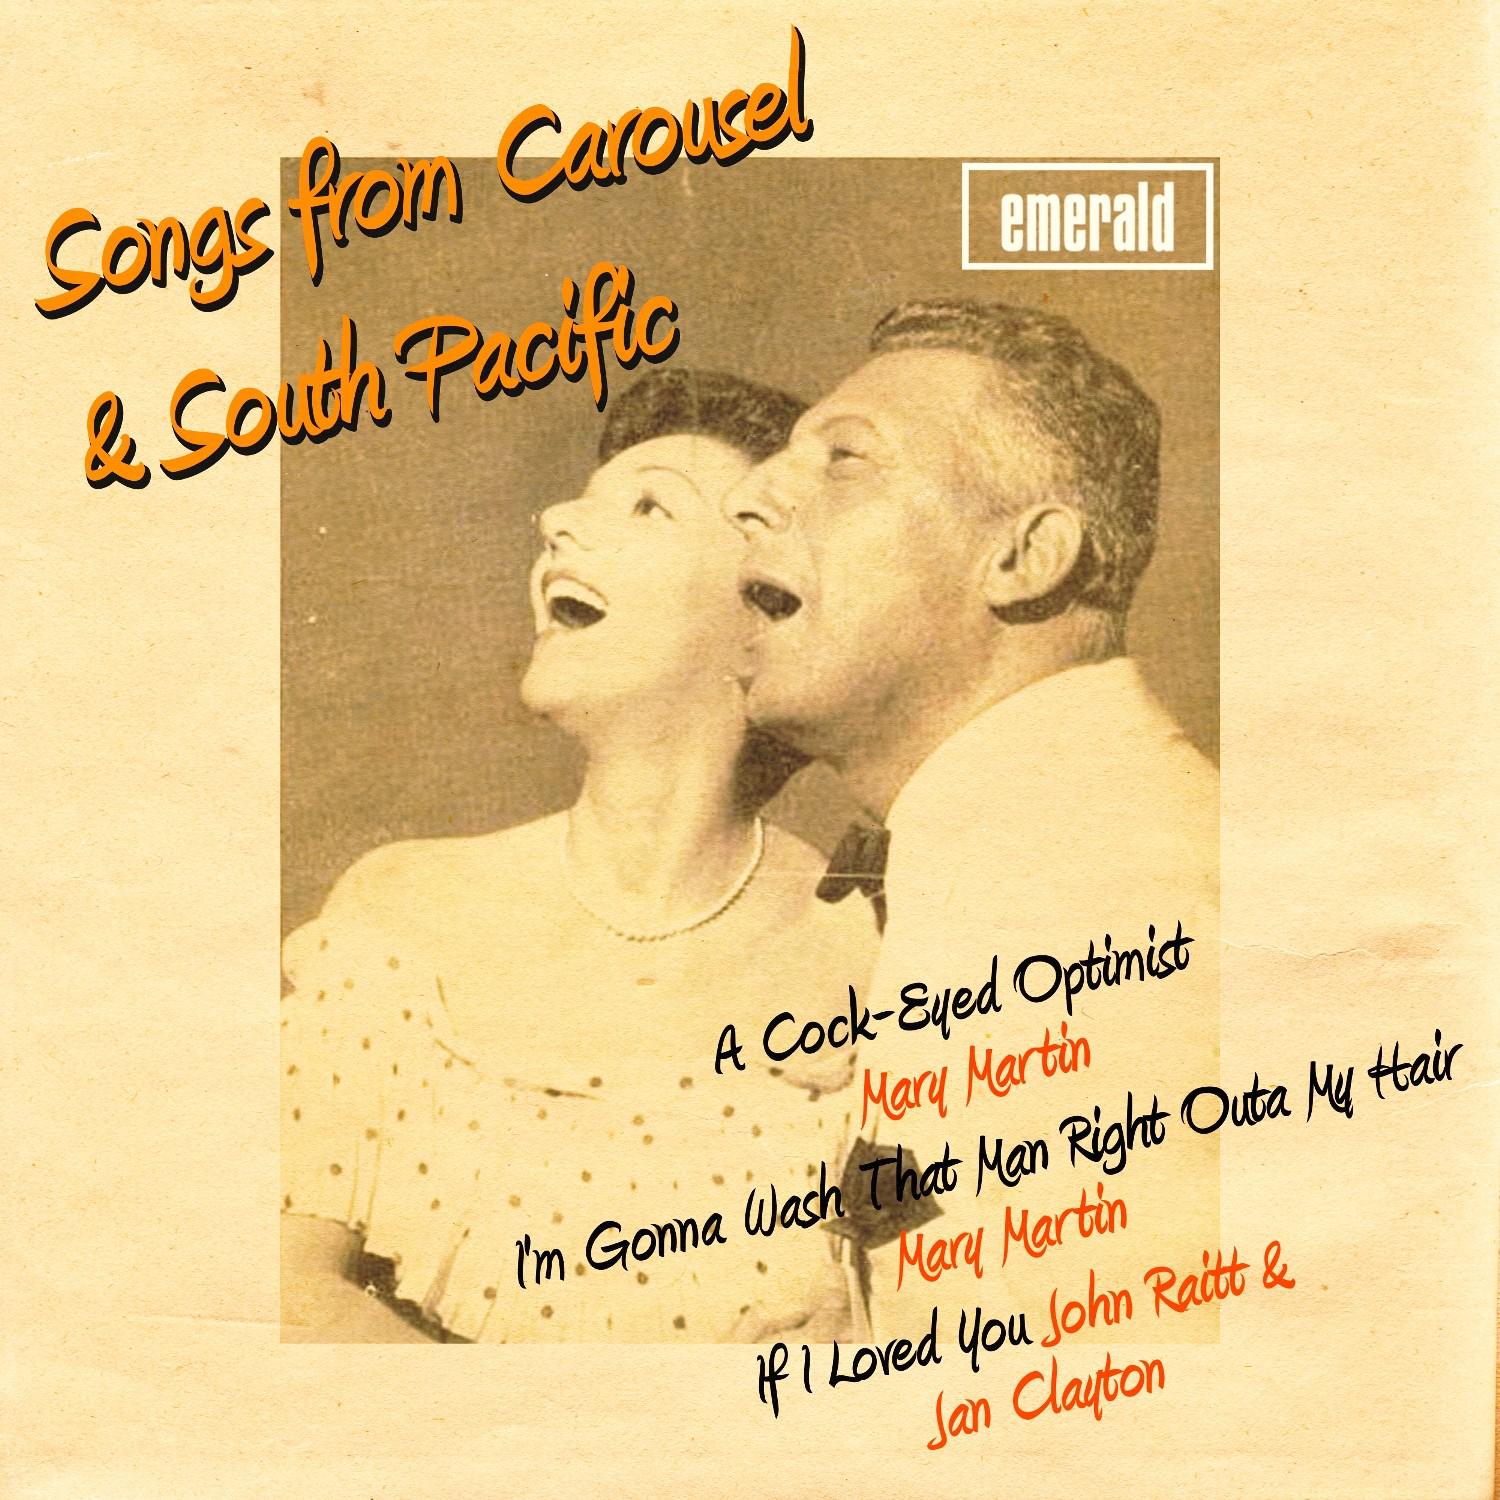 Songs from Carousel & South Pacific